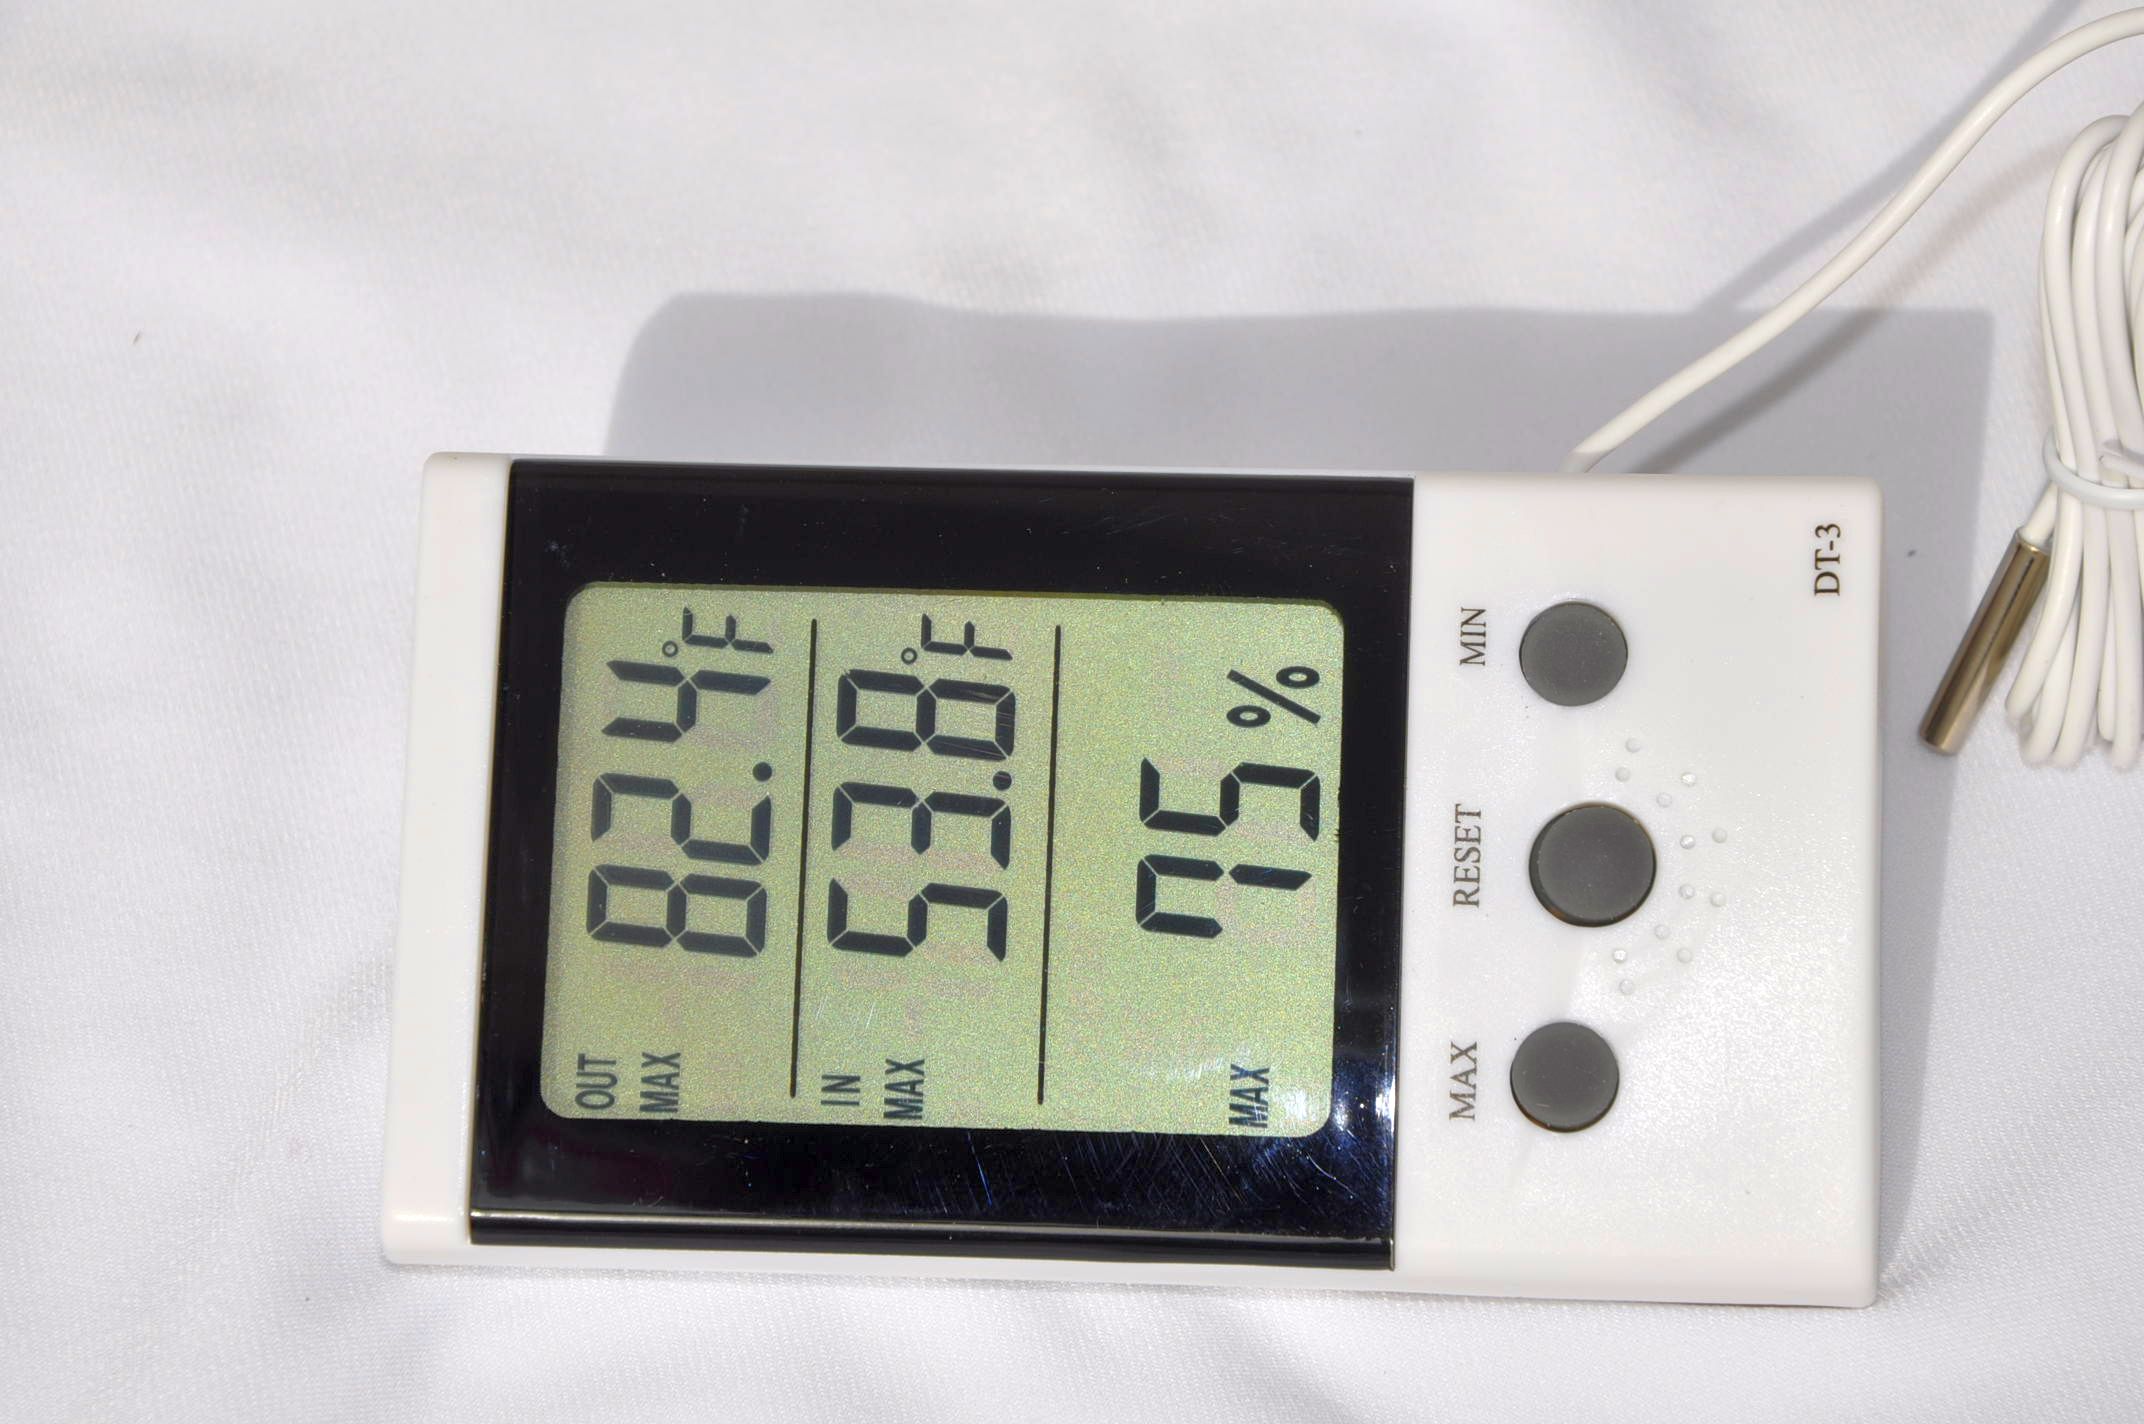 Wired Indoor and Outdoor Thermometer w/ 10-ft Temperature Sensor